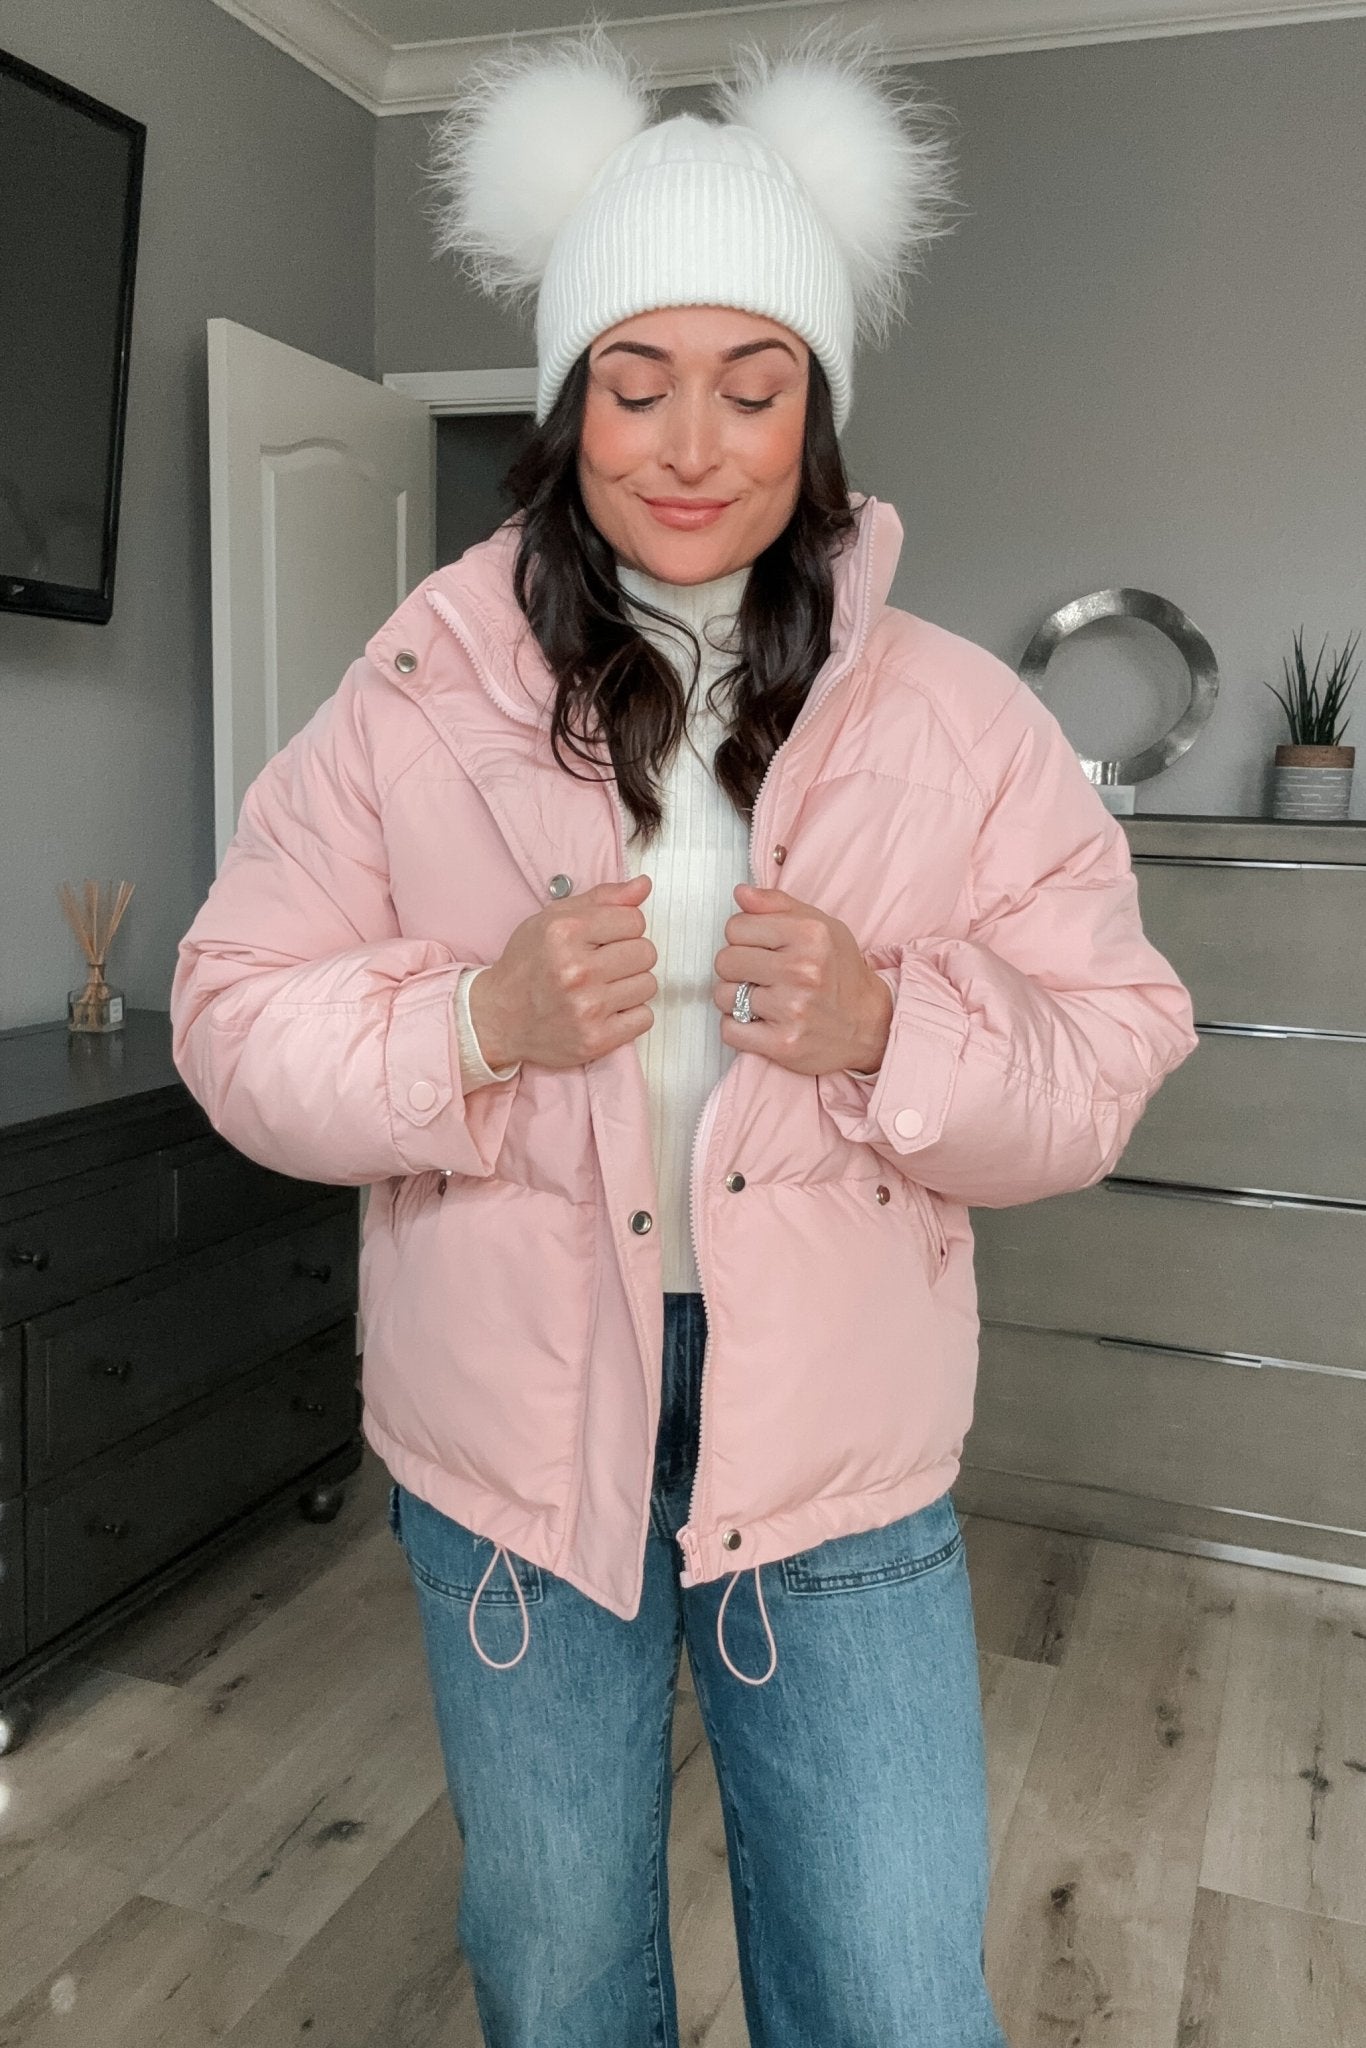 Women's Quilted Puffer Jacket | Winter Coat | Pink - Women's Jacket - Blooming Daily